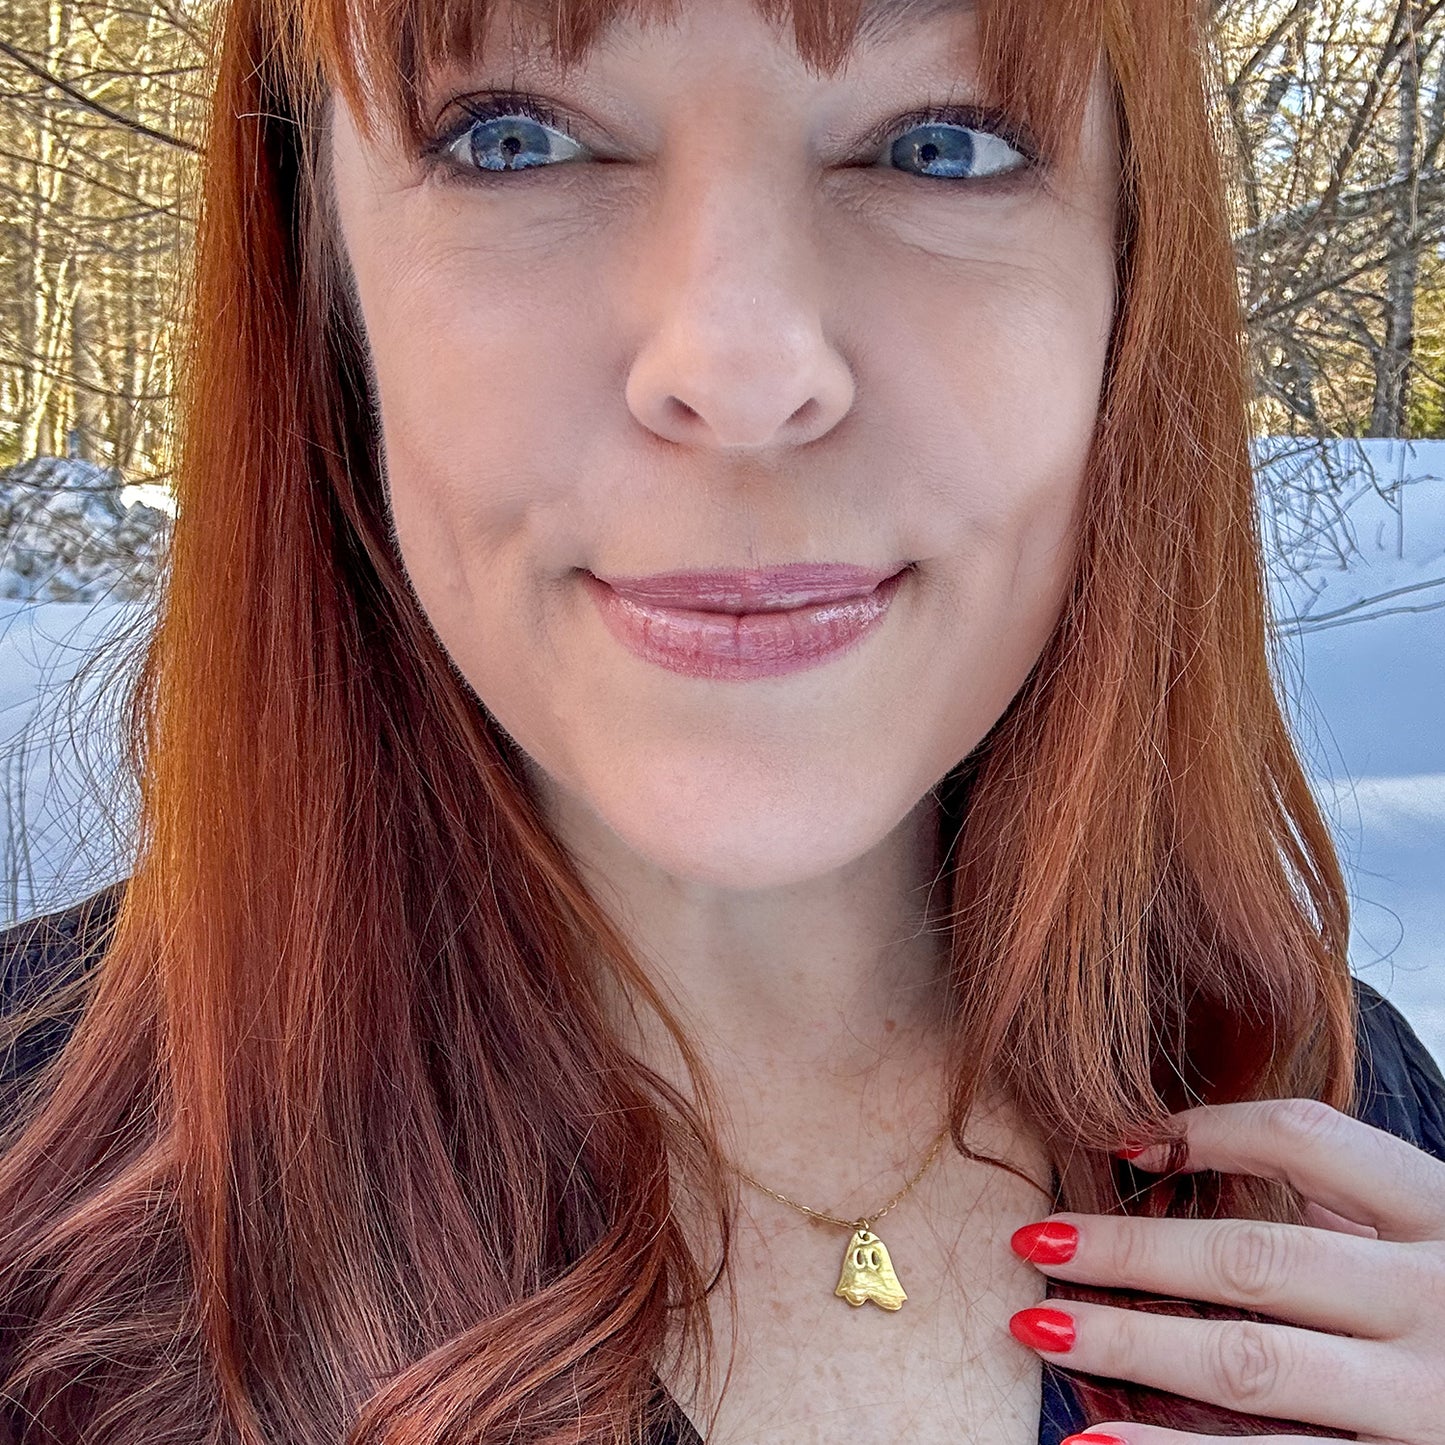 An image of paranormal investigator Amy Bruni, against a snow-covered field of trees. Around her neck is a small gold pendant in the shape of a ghost, with two spots cut out at its eyes. The necklace hangs on a gold chain.